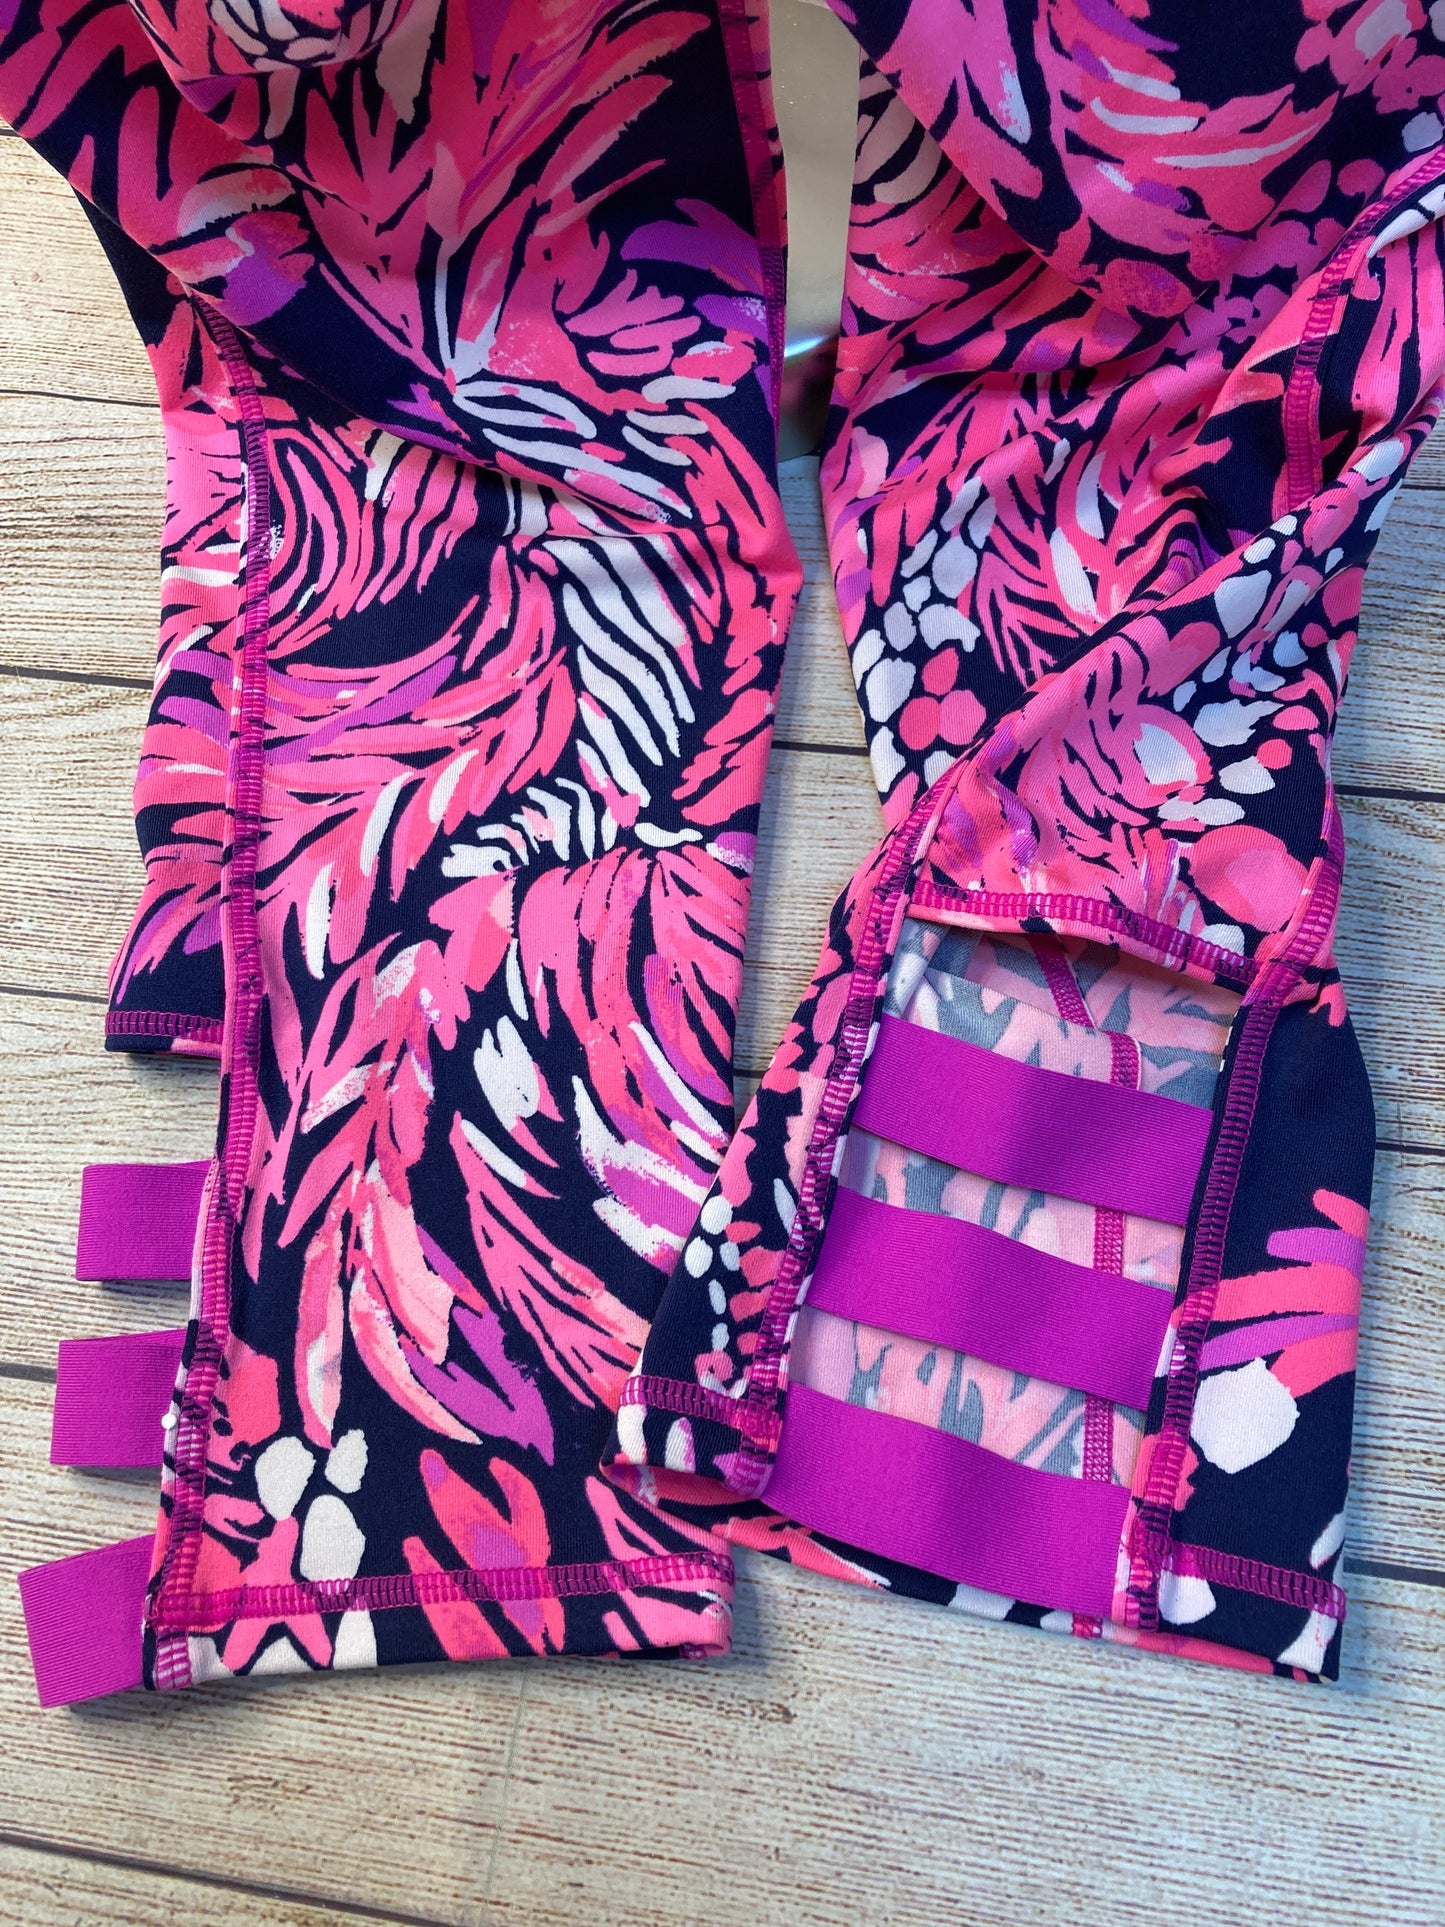 Athletic Capris By Lilly Pulitzer  Size: M